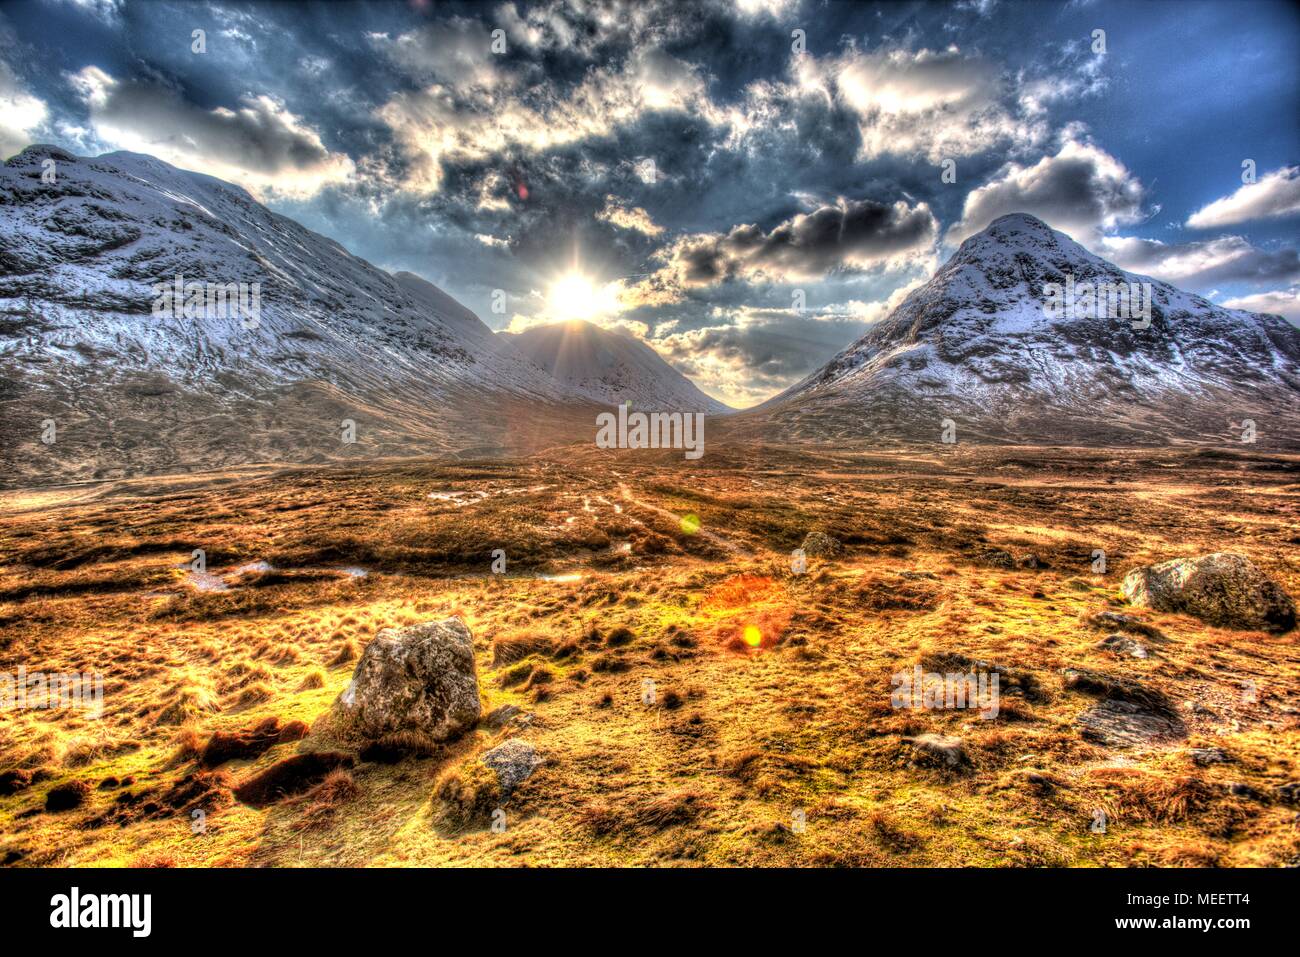 Area of Gen Coe, Scotland. Artistic winter view of Glencoe valley, with Stob nan Cabar on the right of the image and Coire Na Tulaich on the left. Stock Photo